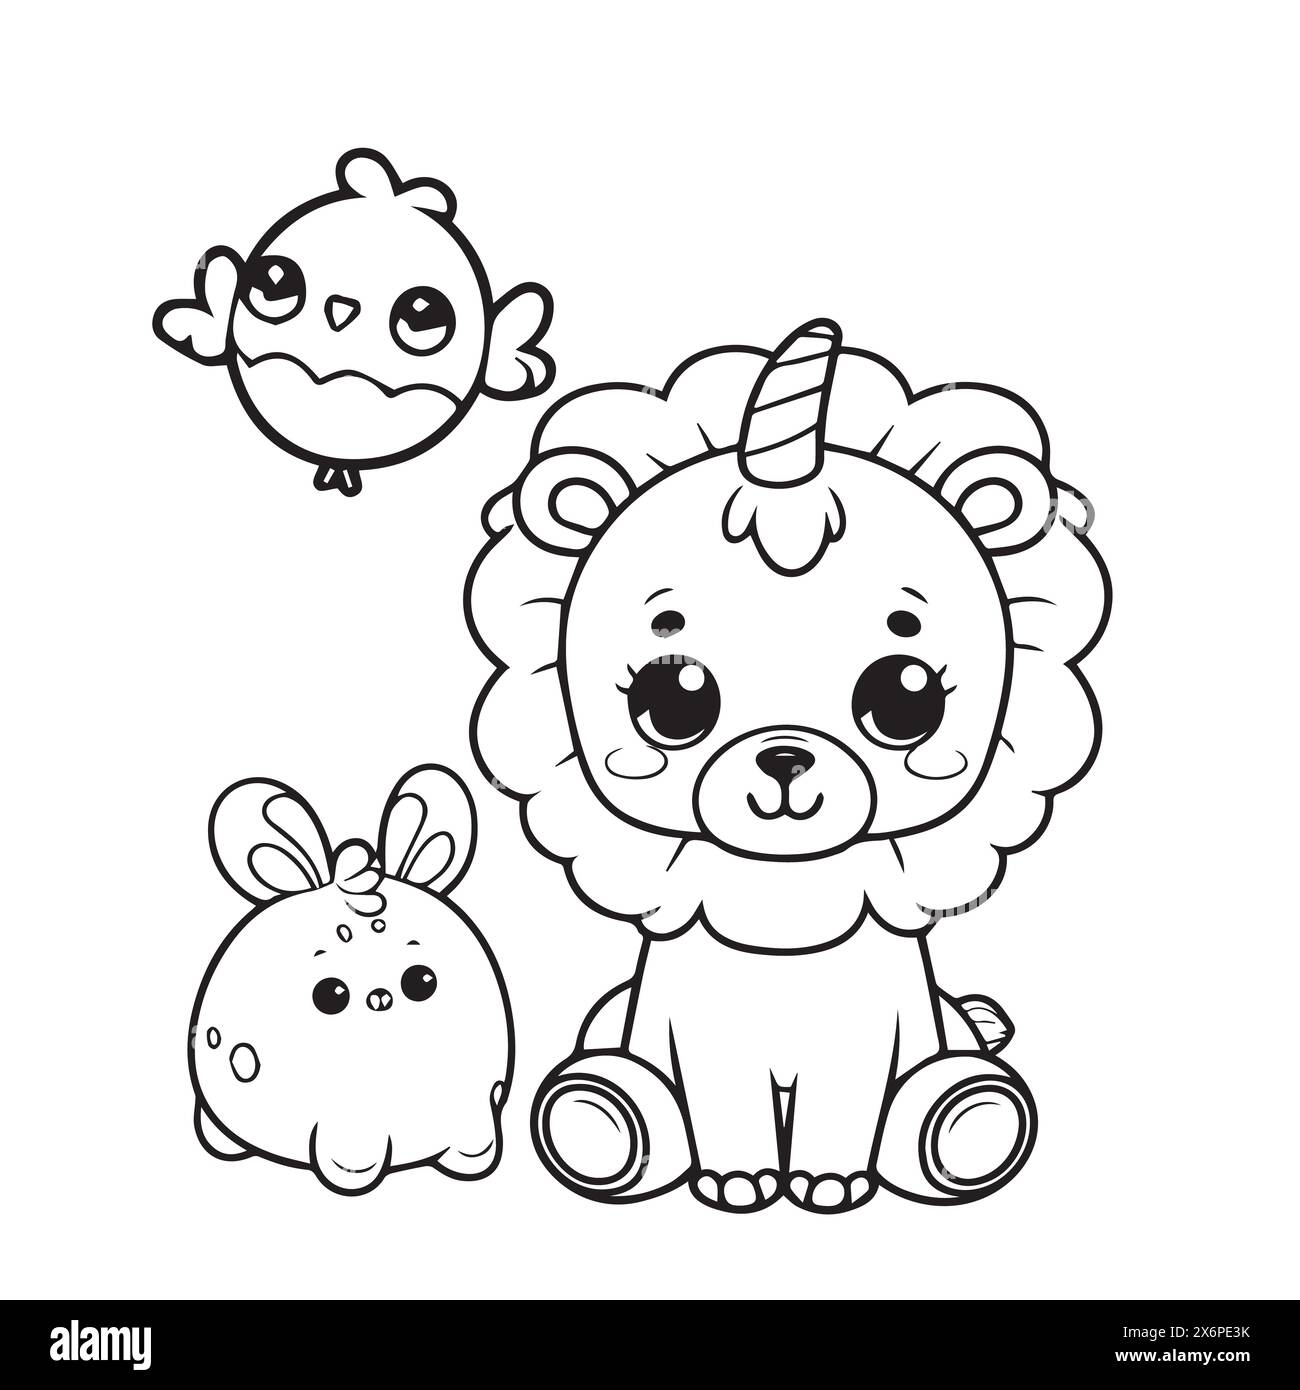 Whimsical Line Art Coloring Book Vector Designs for Children: Creative and Engaging Illustrations to Spark Imagination Stock Vector